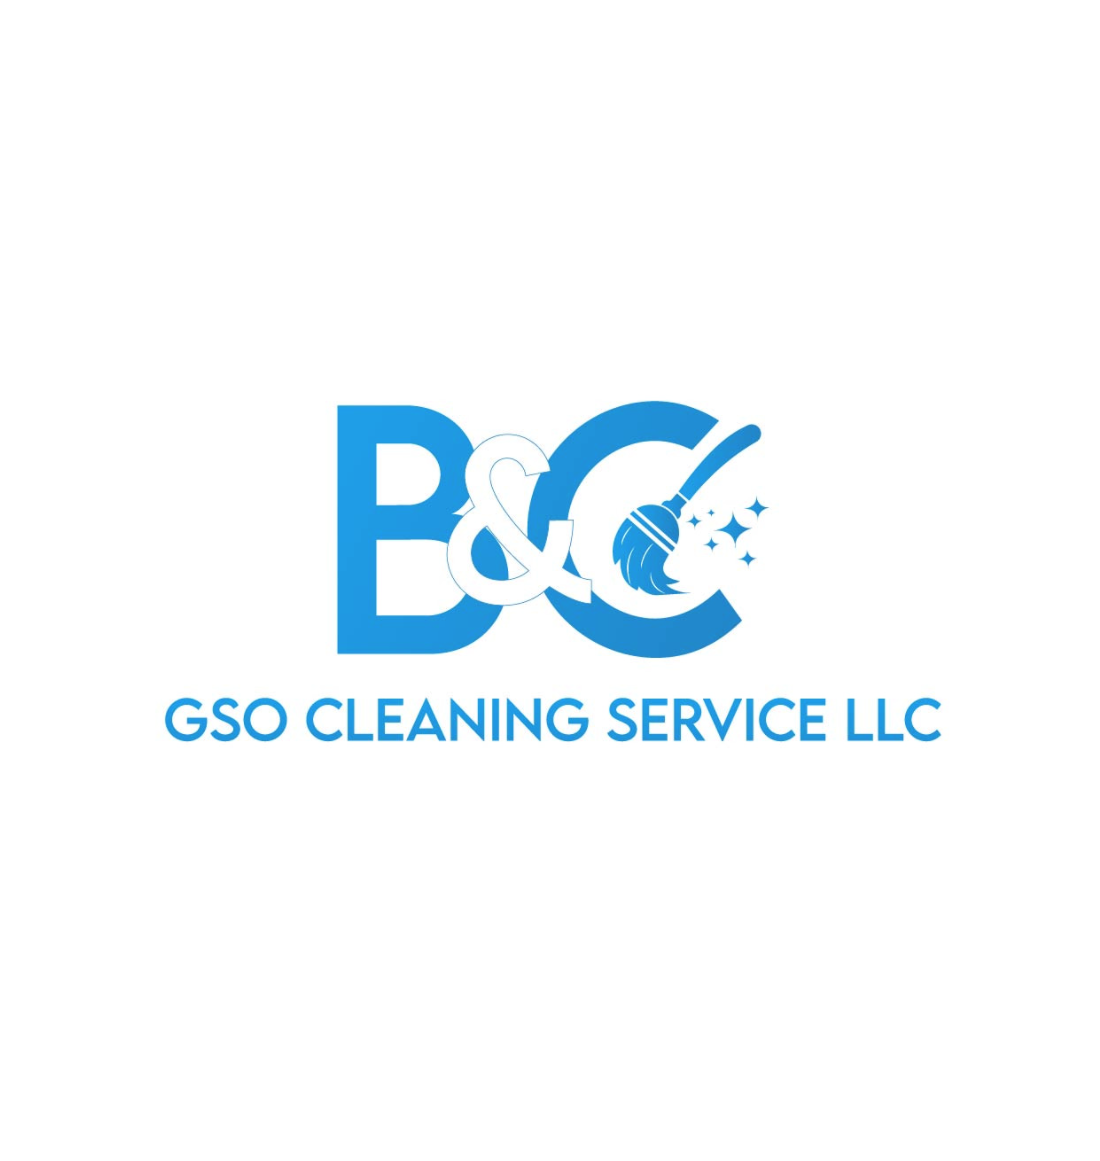 GSO Cleaning Service LLC